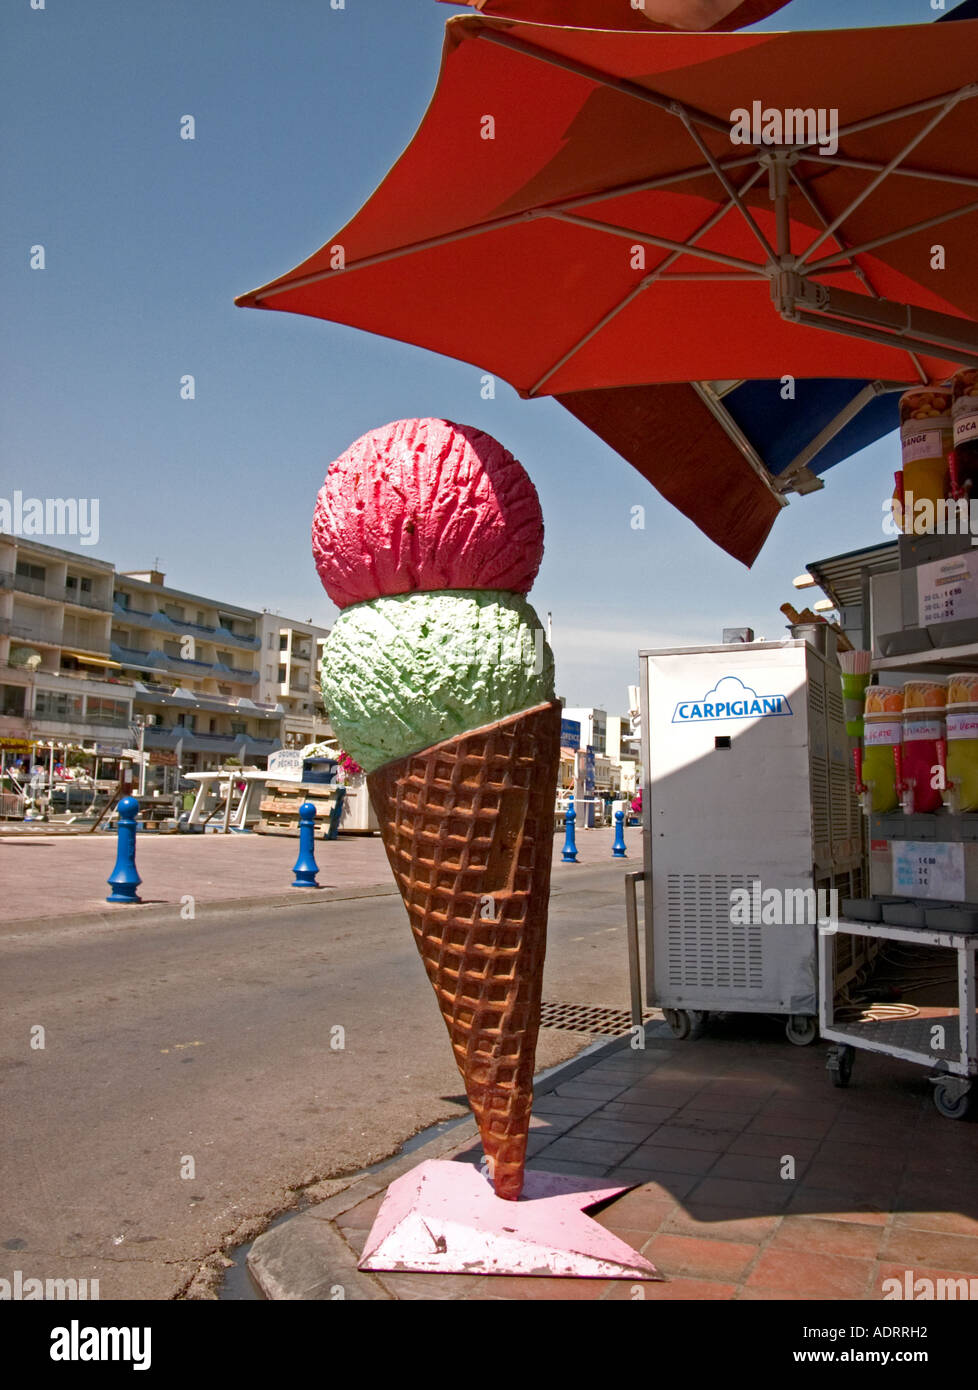 a large sculpture of an ice cream under a parasol on a pavement Stock Photo